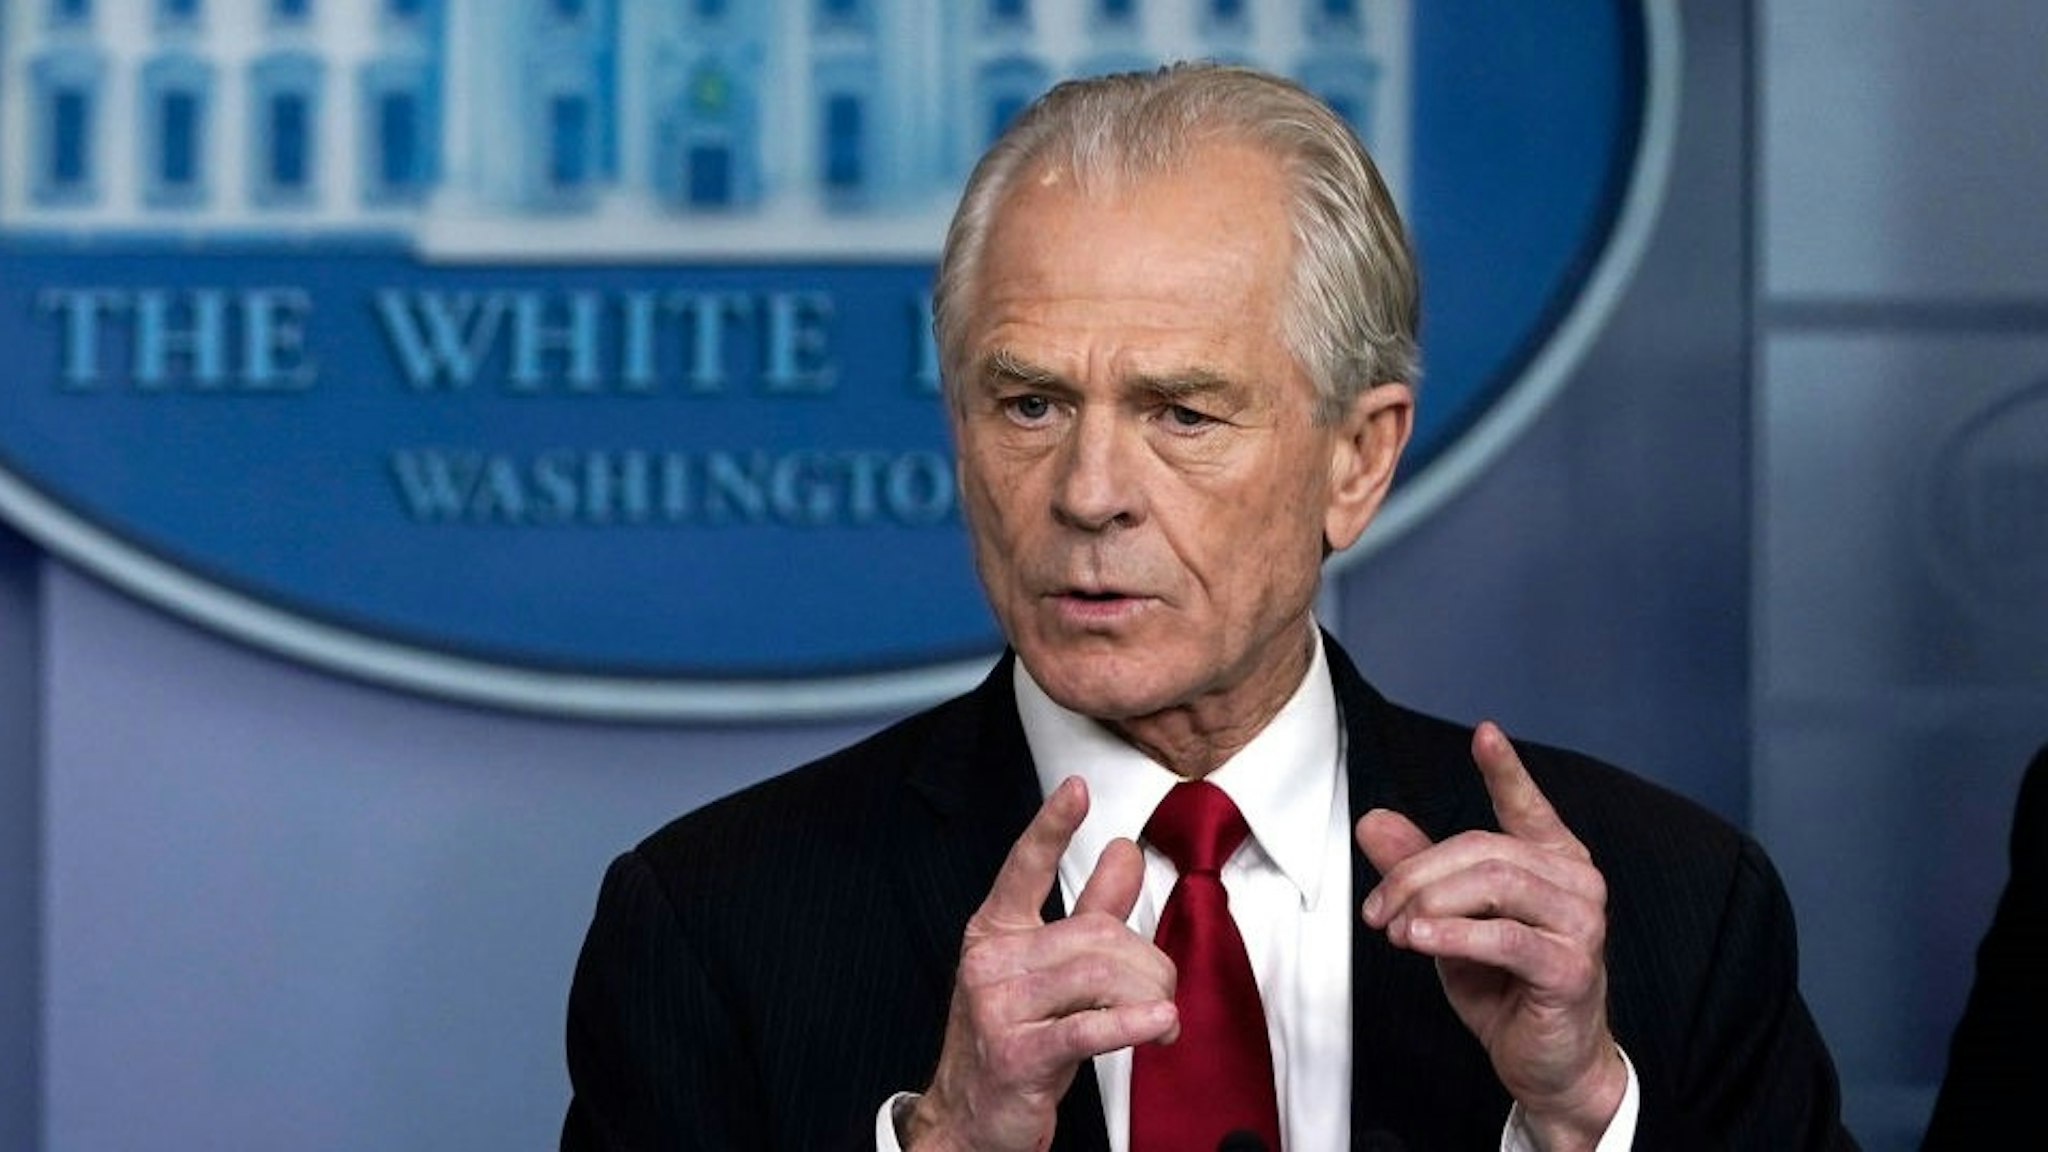 WASHINGTON, DC - MARCH 27: White House Trade and Manufacturing Policy Director Peter Navarro speaks during a briefing on the coronavirus pandemic in the press briefing room of the White House on March 27, 2020 in Washington, DC. President Trump signed the H.R. 748, the CARES Act on Friday afternoon. Earlier in the day, the U.S. House of Representatives approved the $2 trillion stimulus bill that lawmakers hope will battle the economic effects of the COVID-19 pandemic. (Photo by